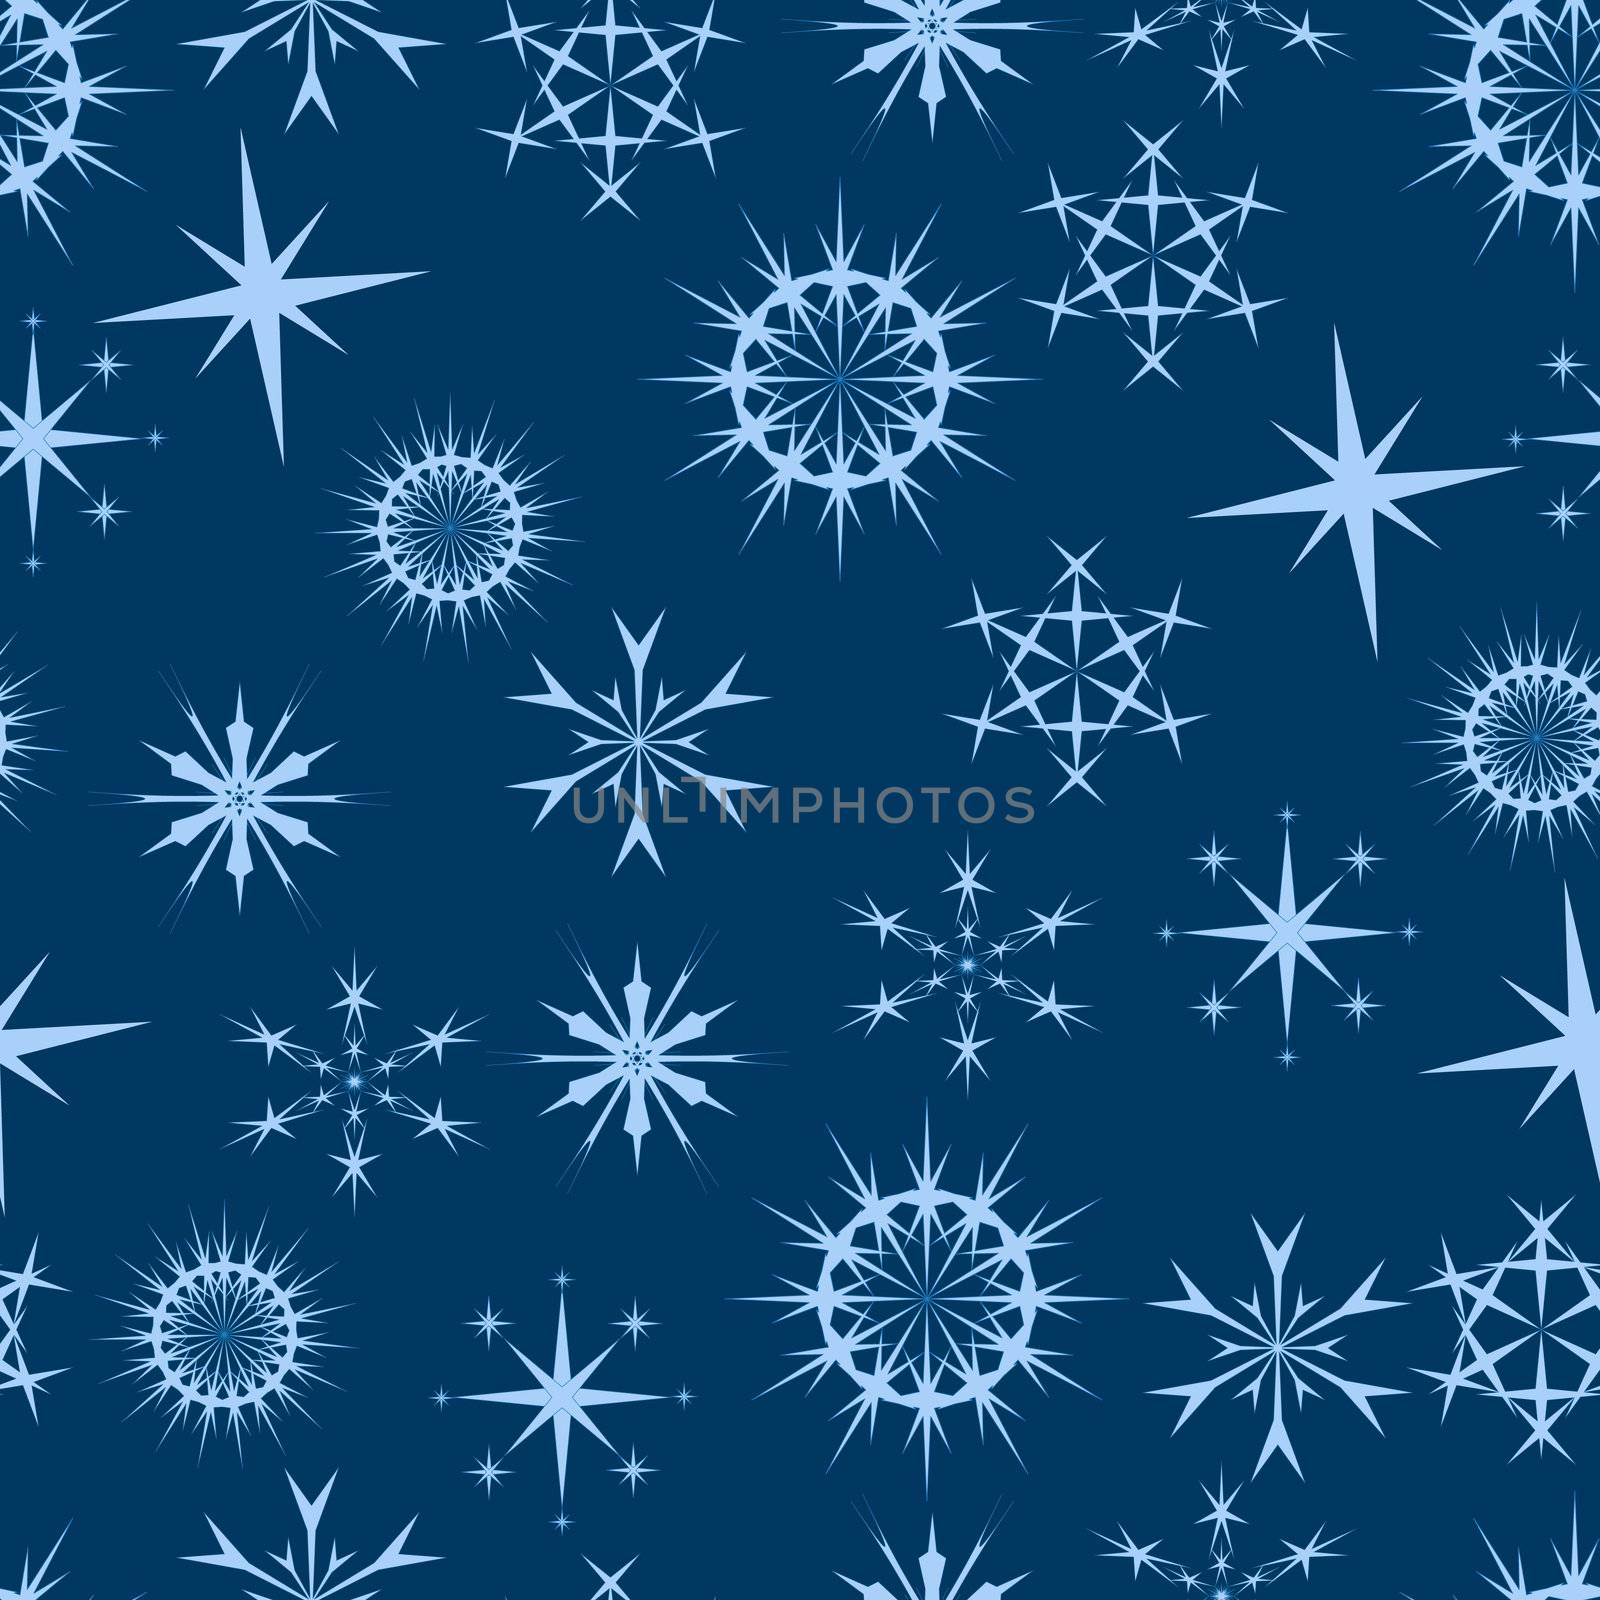 stars and snowflakes background that tiles seamlessly as a pattern